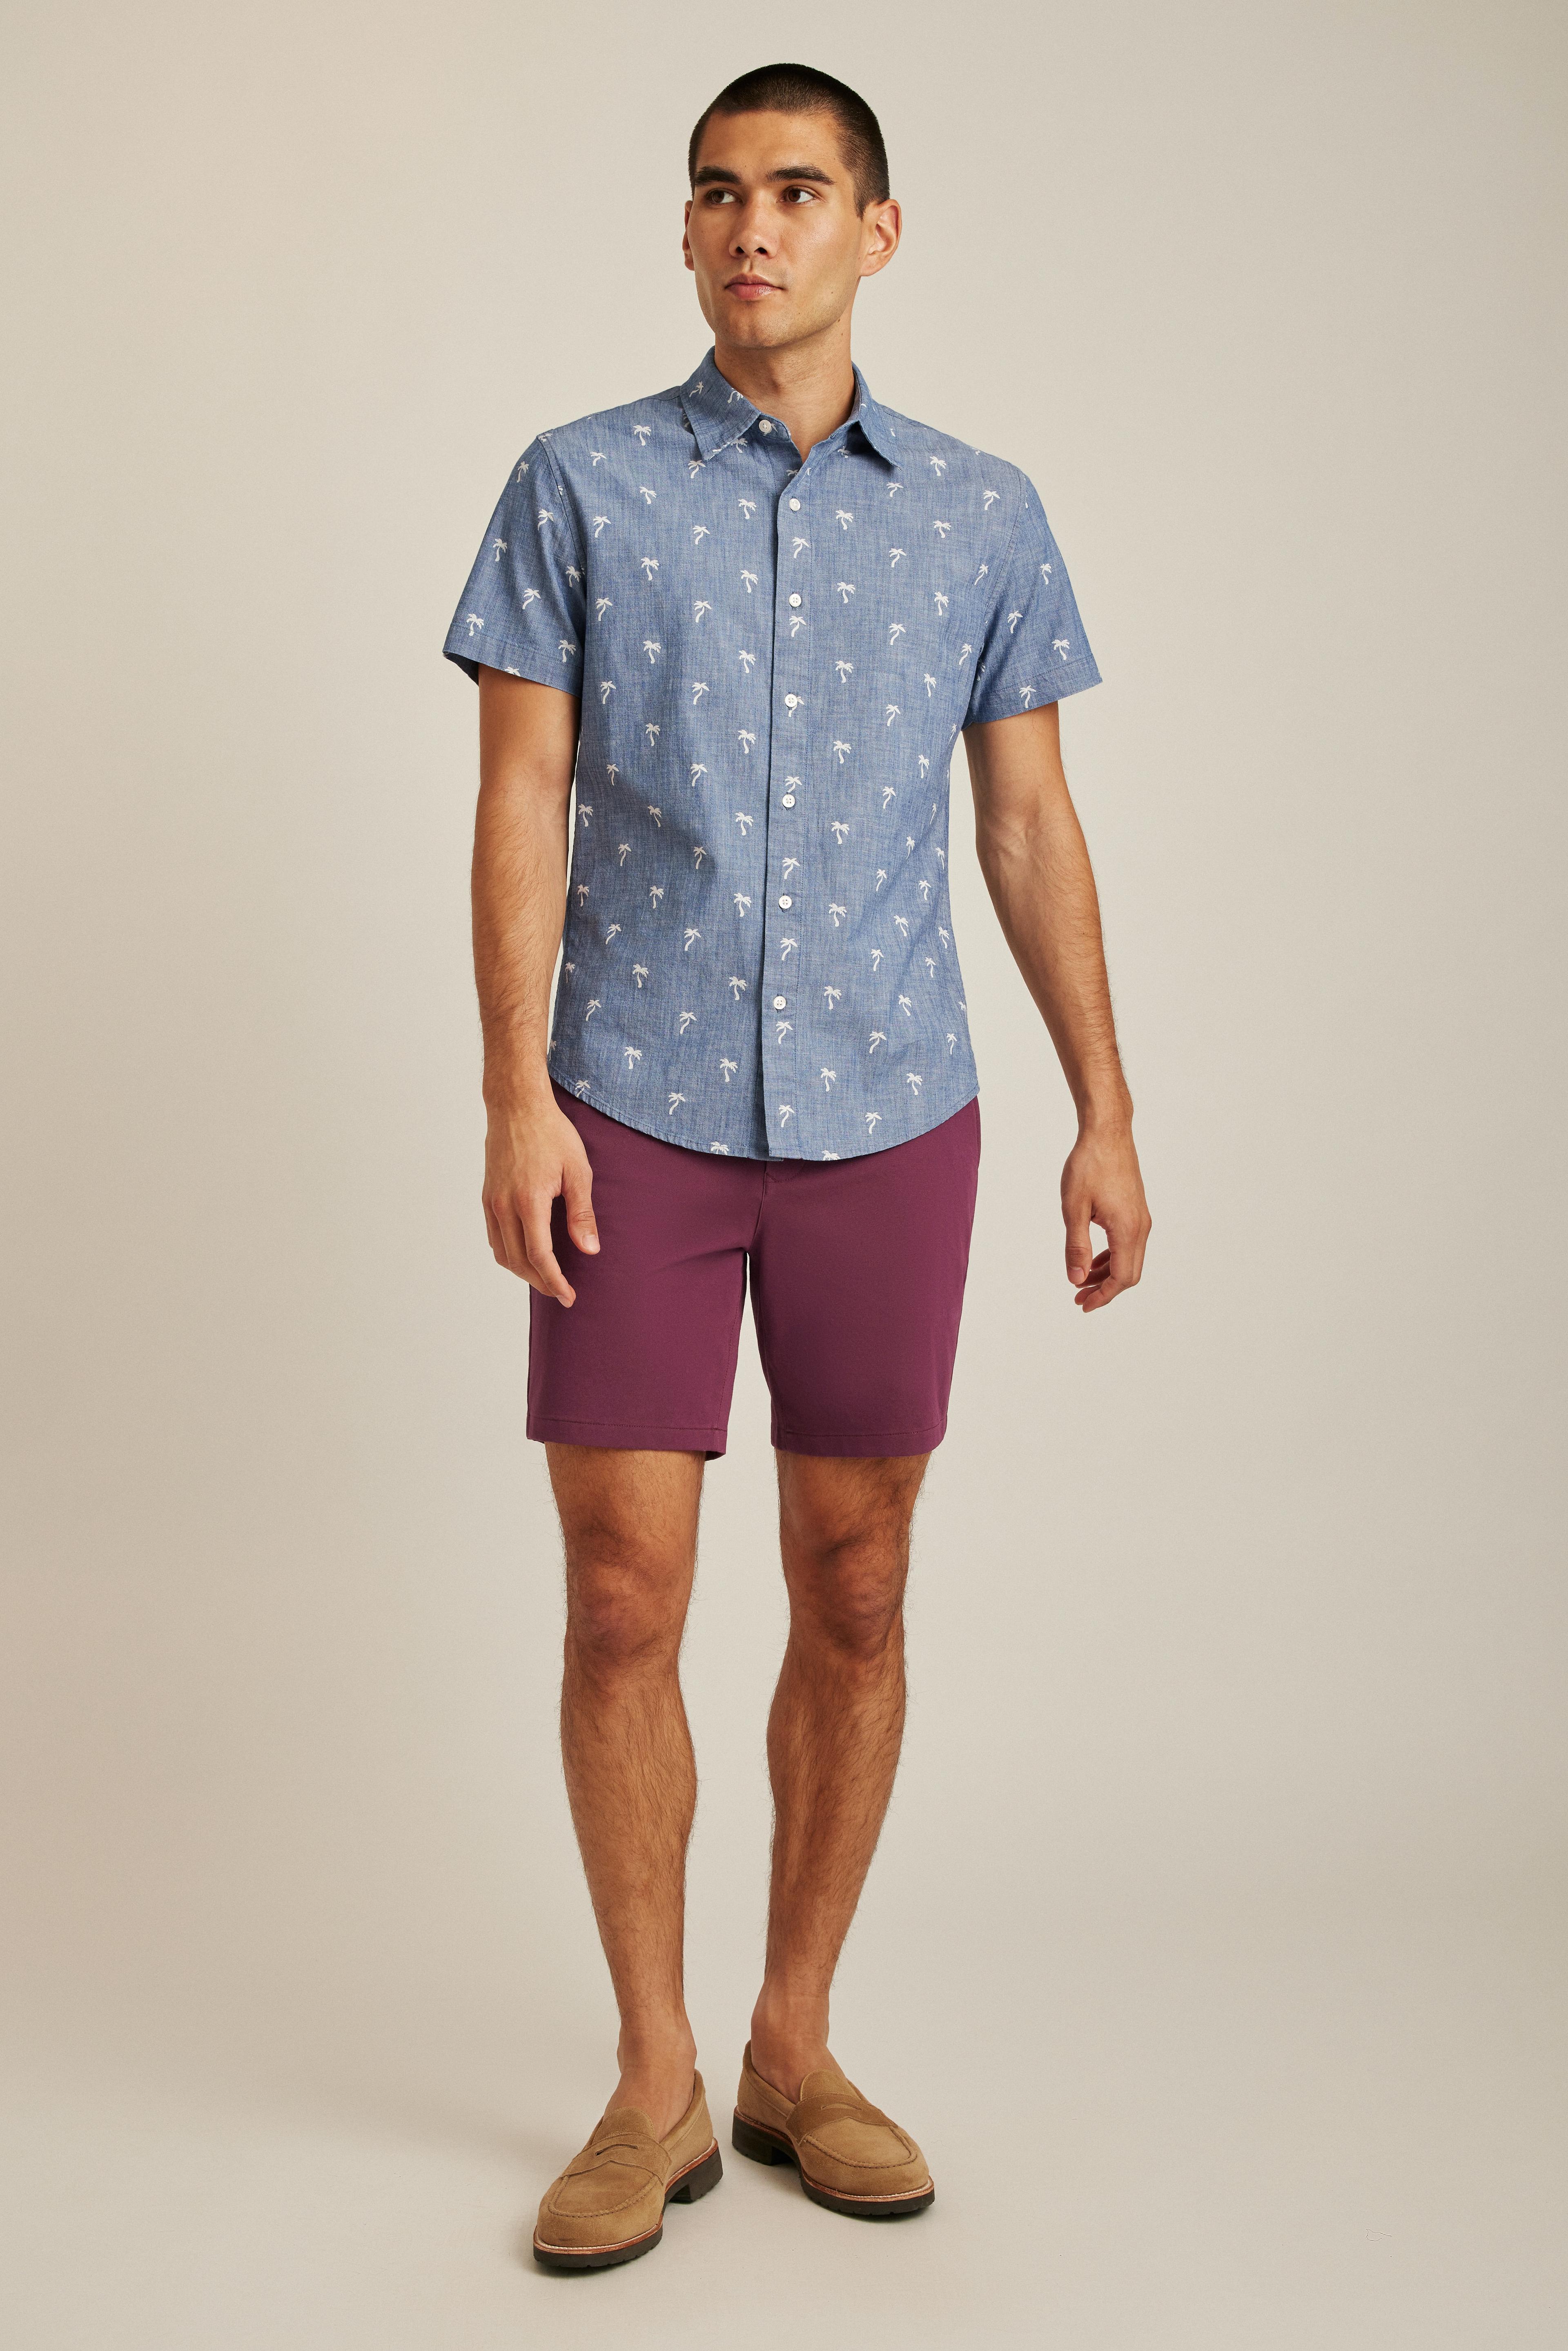 Bonobos | Better-Fitting, Better-Looking Men's Clothing & Accessories | Bonobos